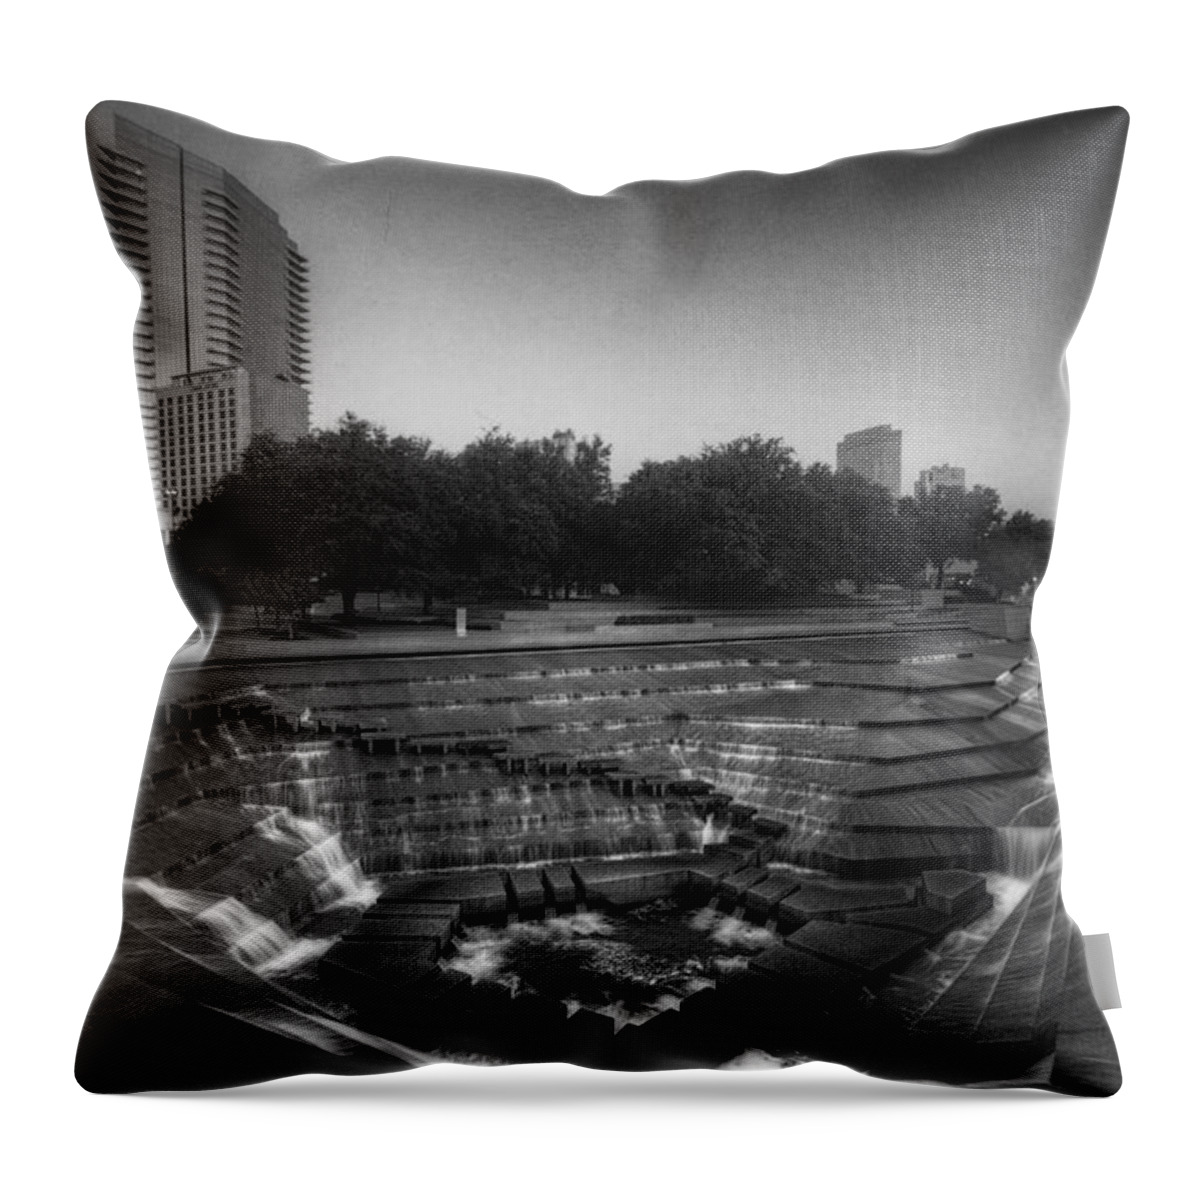 Water Garden Throw Pillow featuring the photograph Fort Worth Water Gardens by Joan Carroll